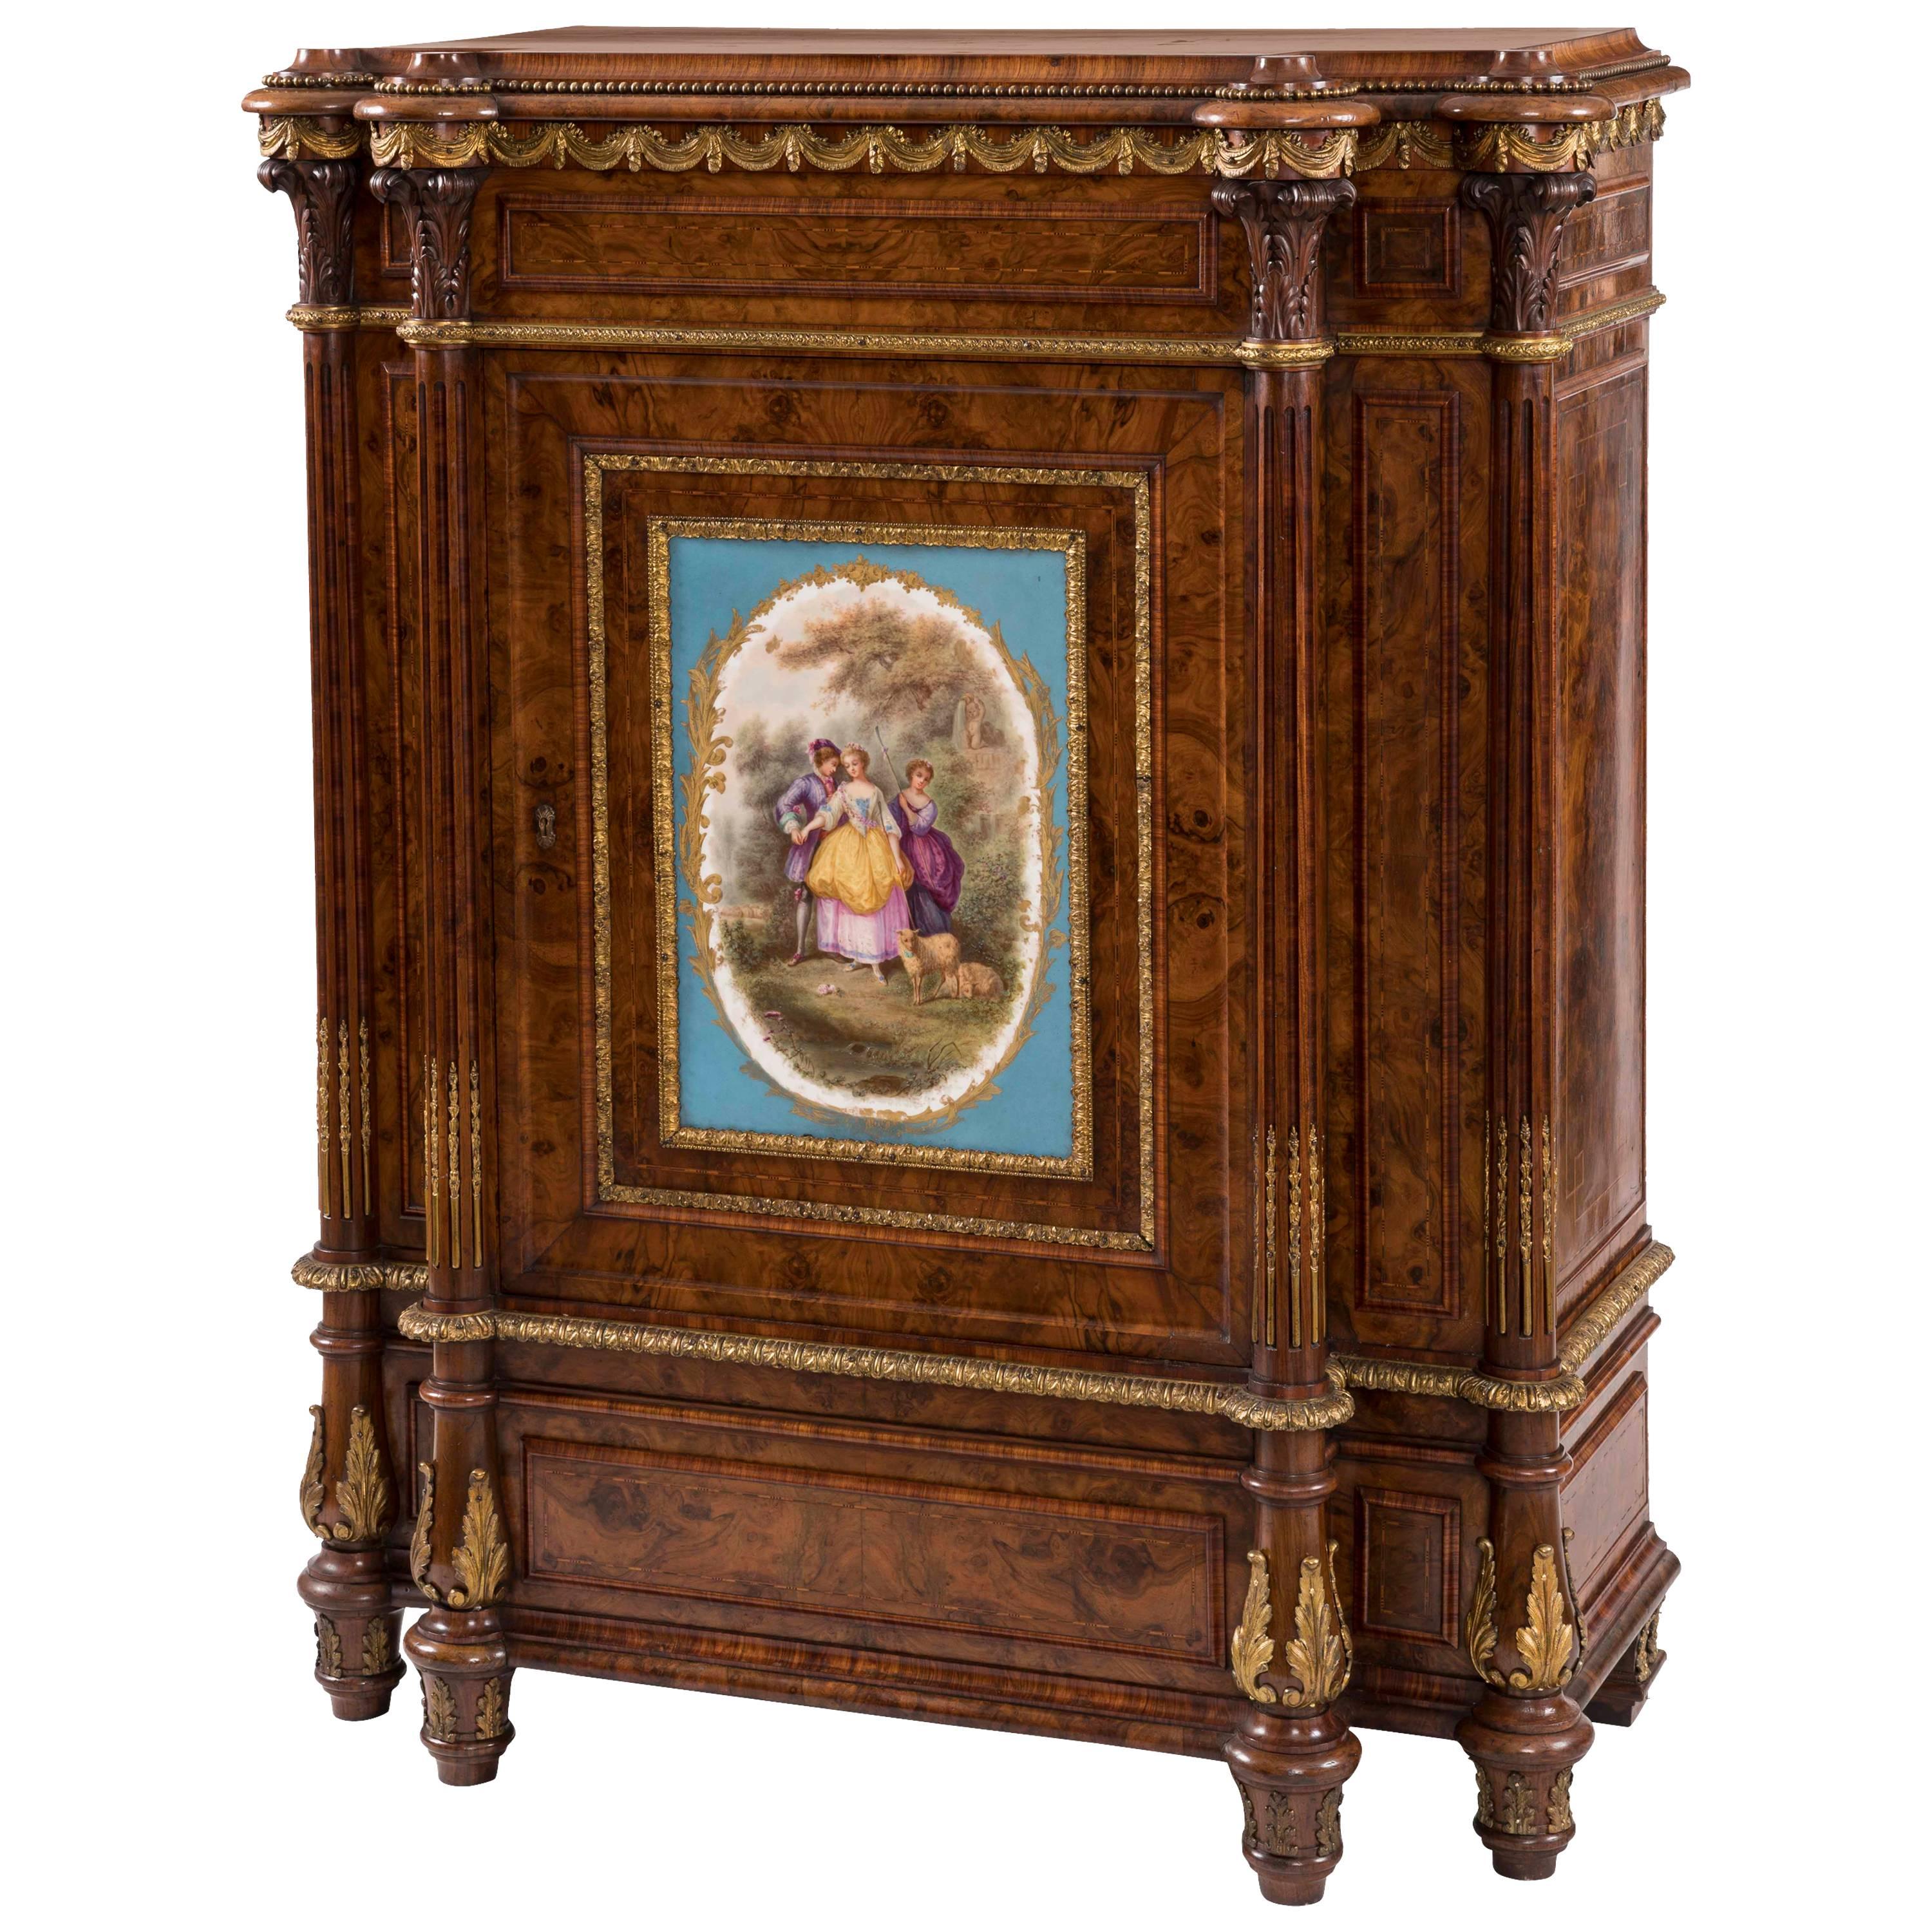 19th Century English Walnut and Ormolu Cabinet with Sèvres Porcelain Plaque For Sale